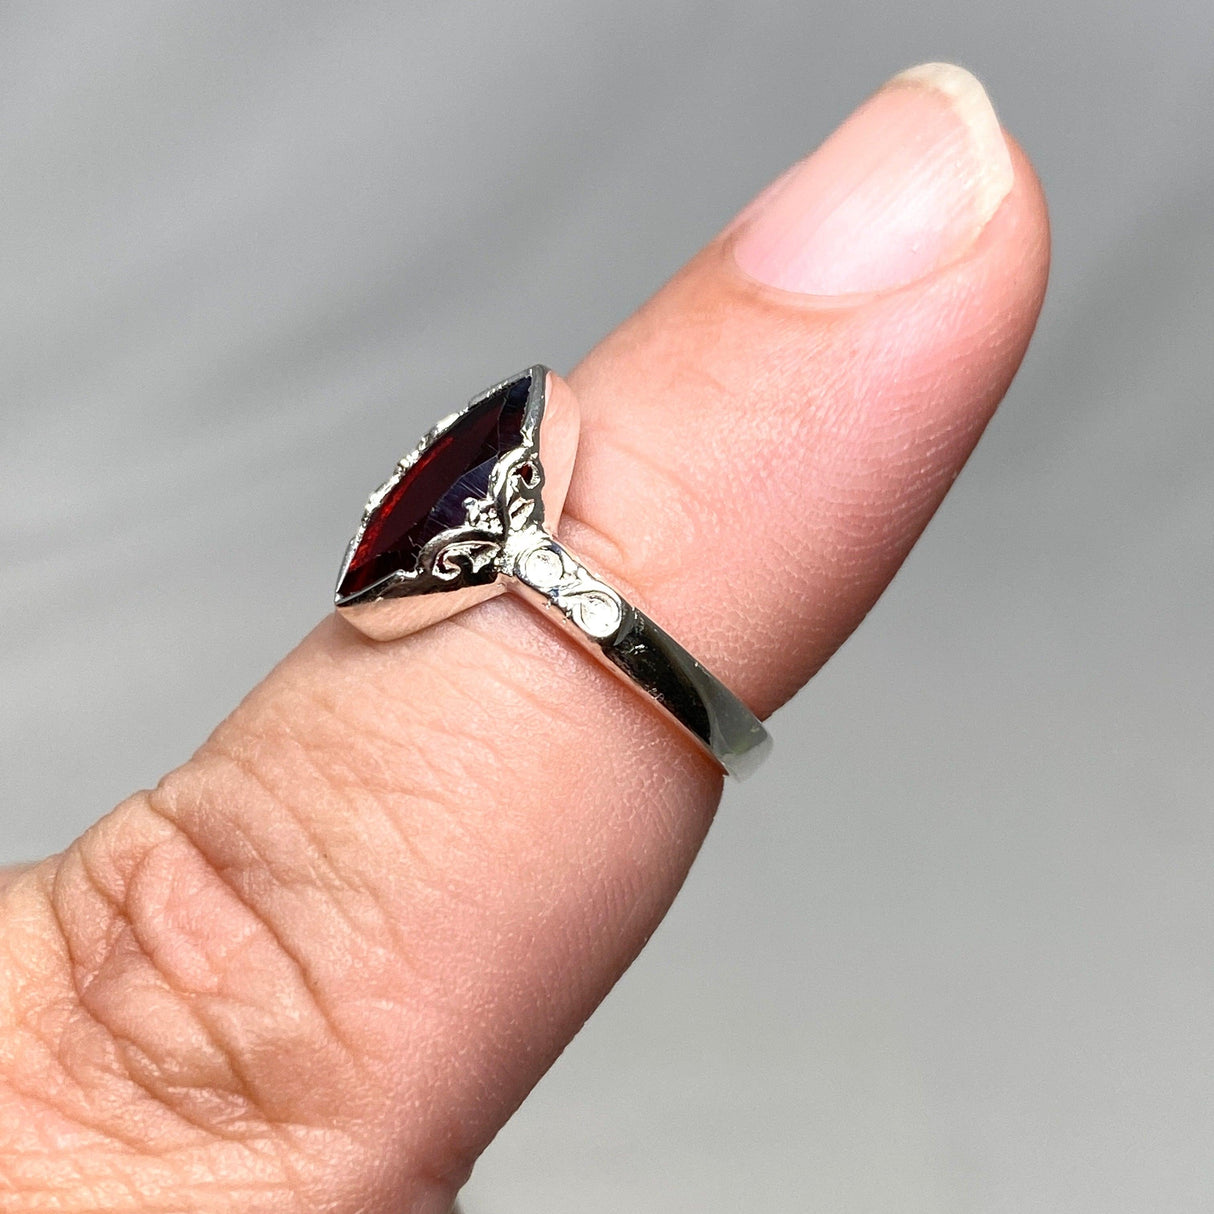 Garnet Faceted Marquise Ring in a Decorative Setting R3726 - Nature's Magick